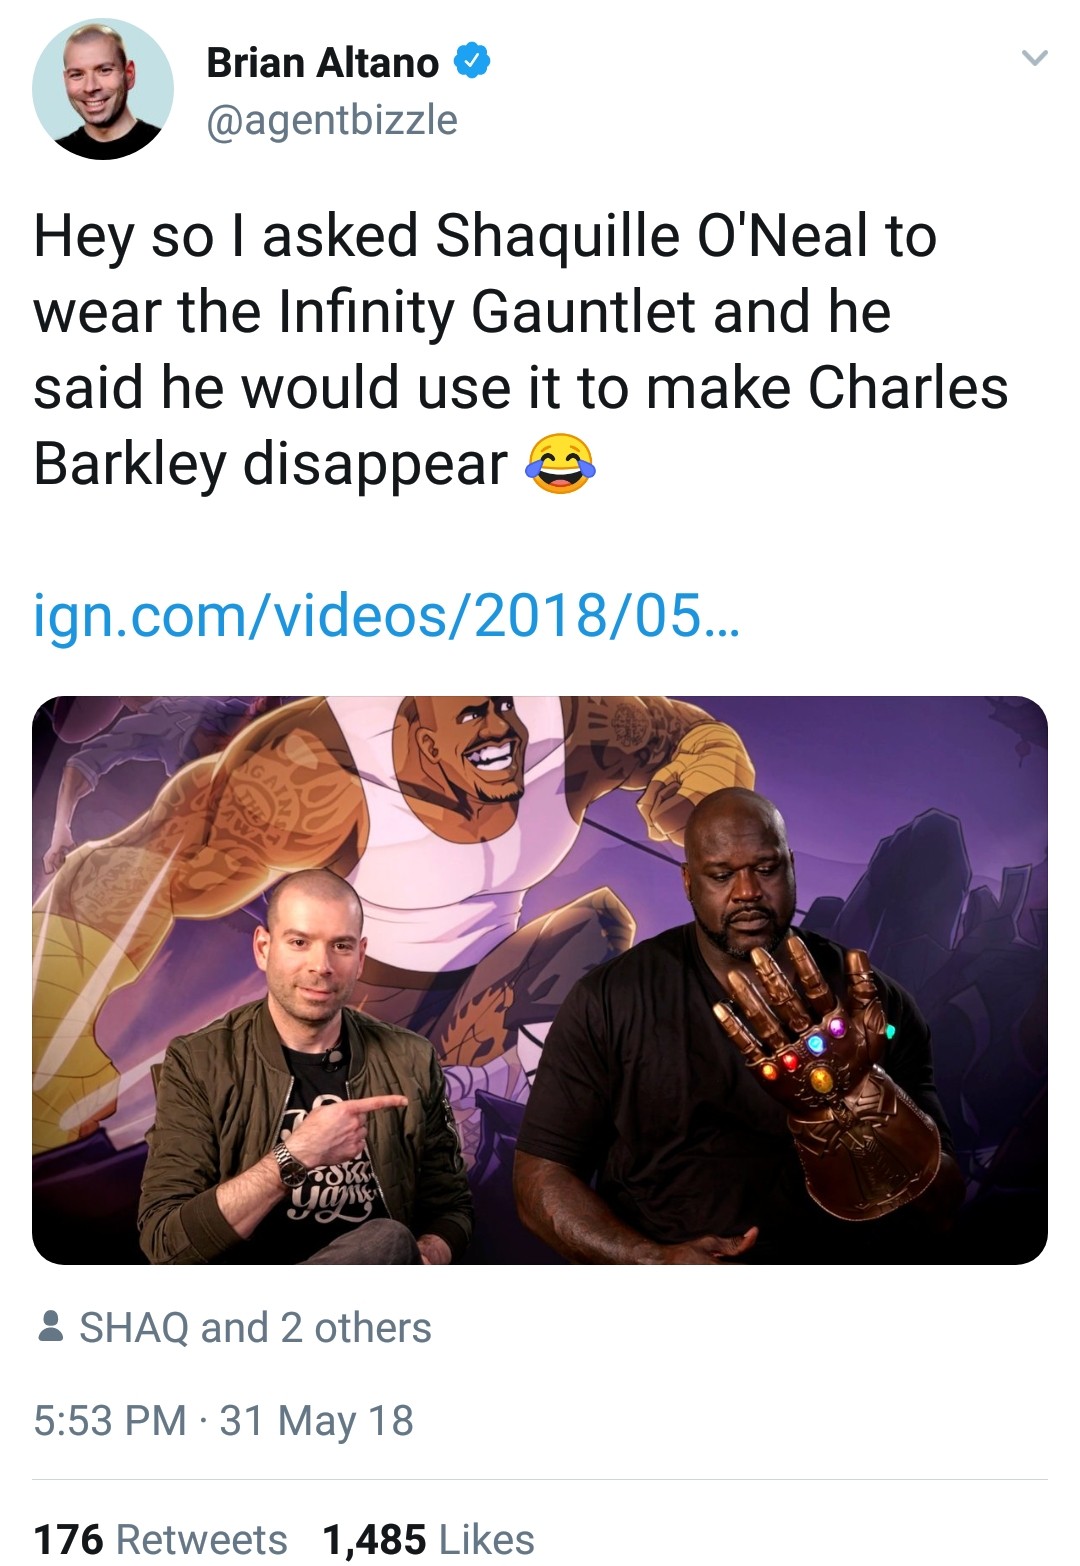 media - Brian Altano Hey so I asked Shaquille O'Neal to wear the Infinity Gauntlet and he said he would use it to make Charles Barkley disappear ign.comvideos201805... 685 Shaq and 2 others 31 May 18 176 1,485